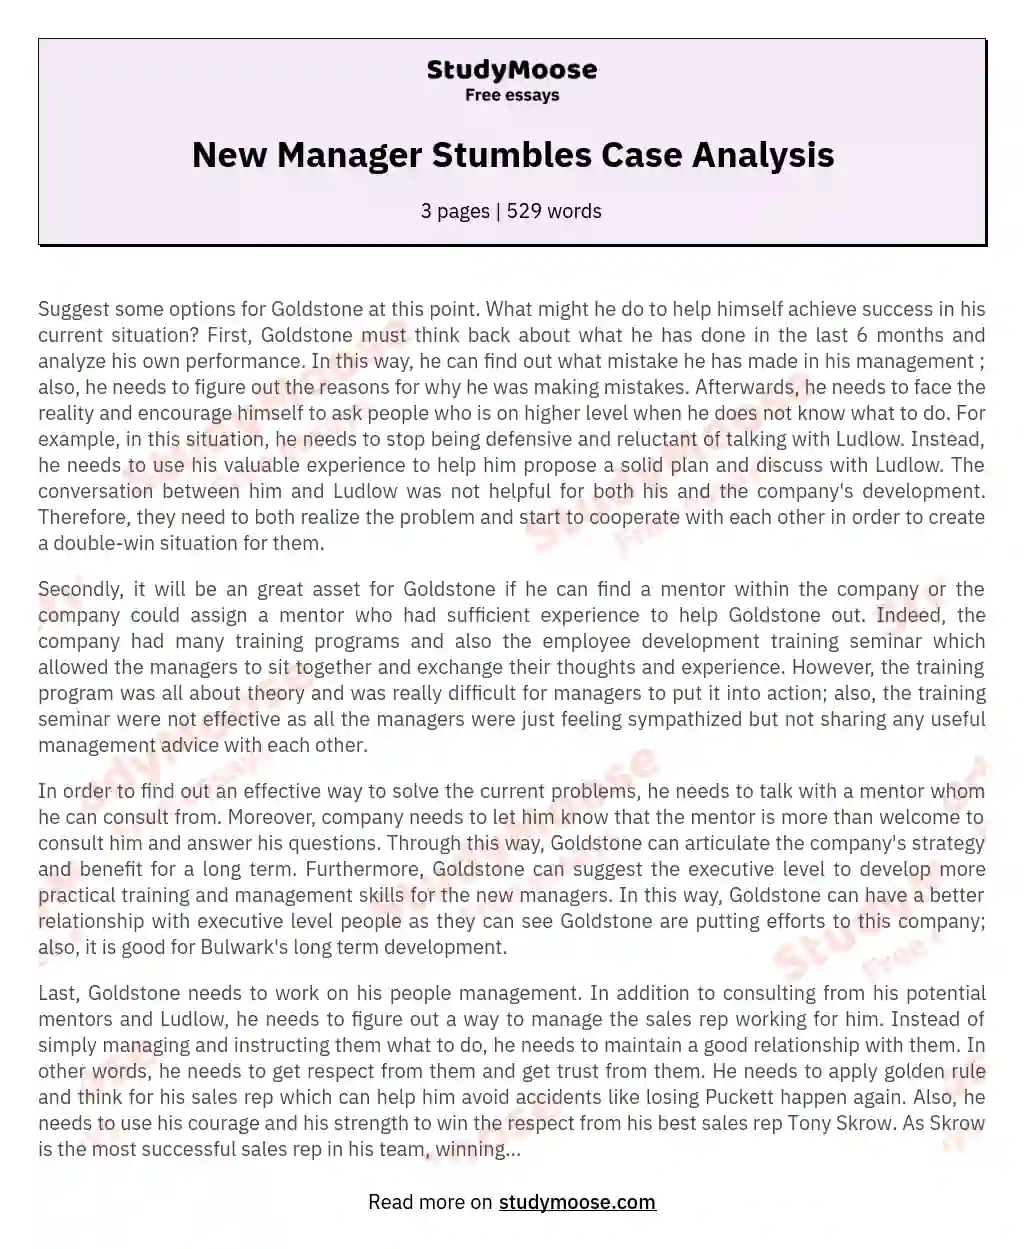 New Manager Stumbles Case Analysis essay